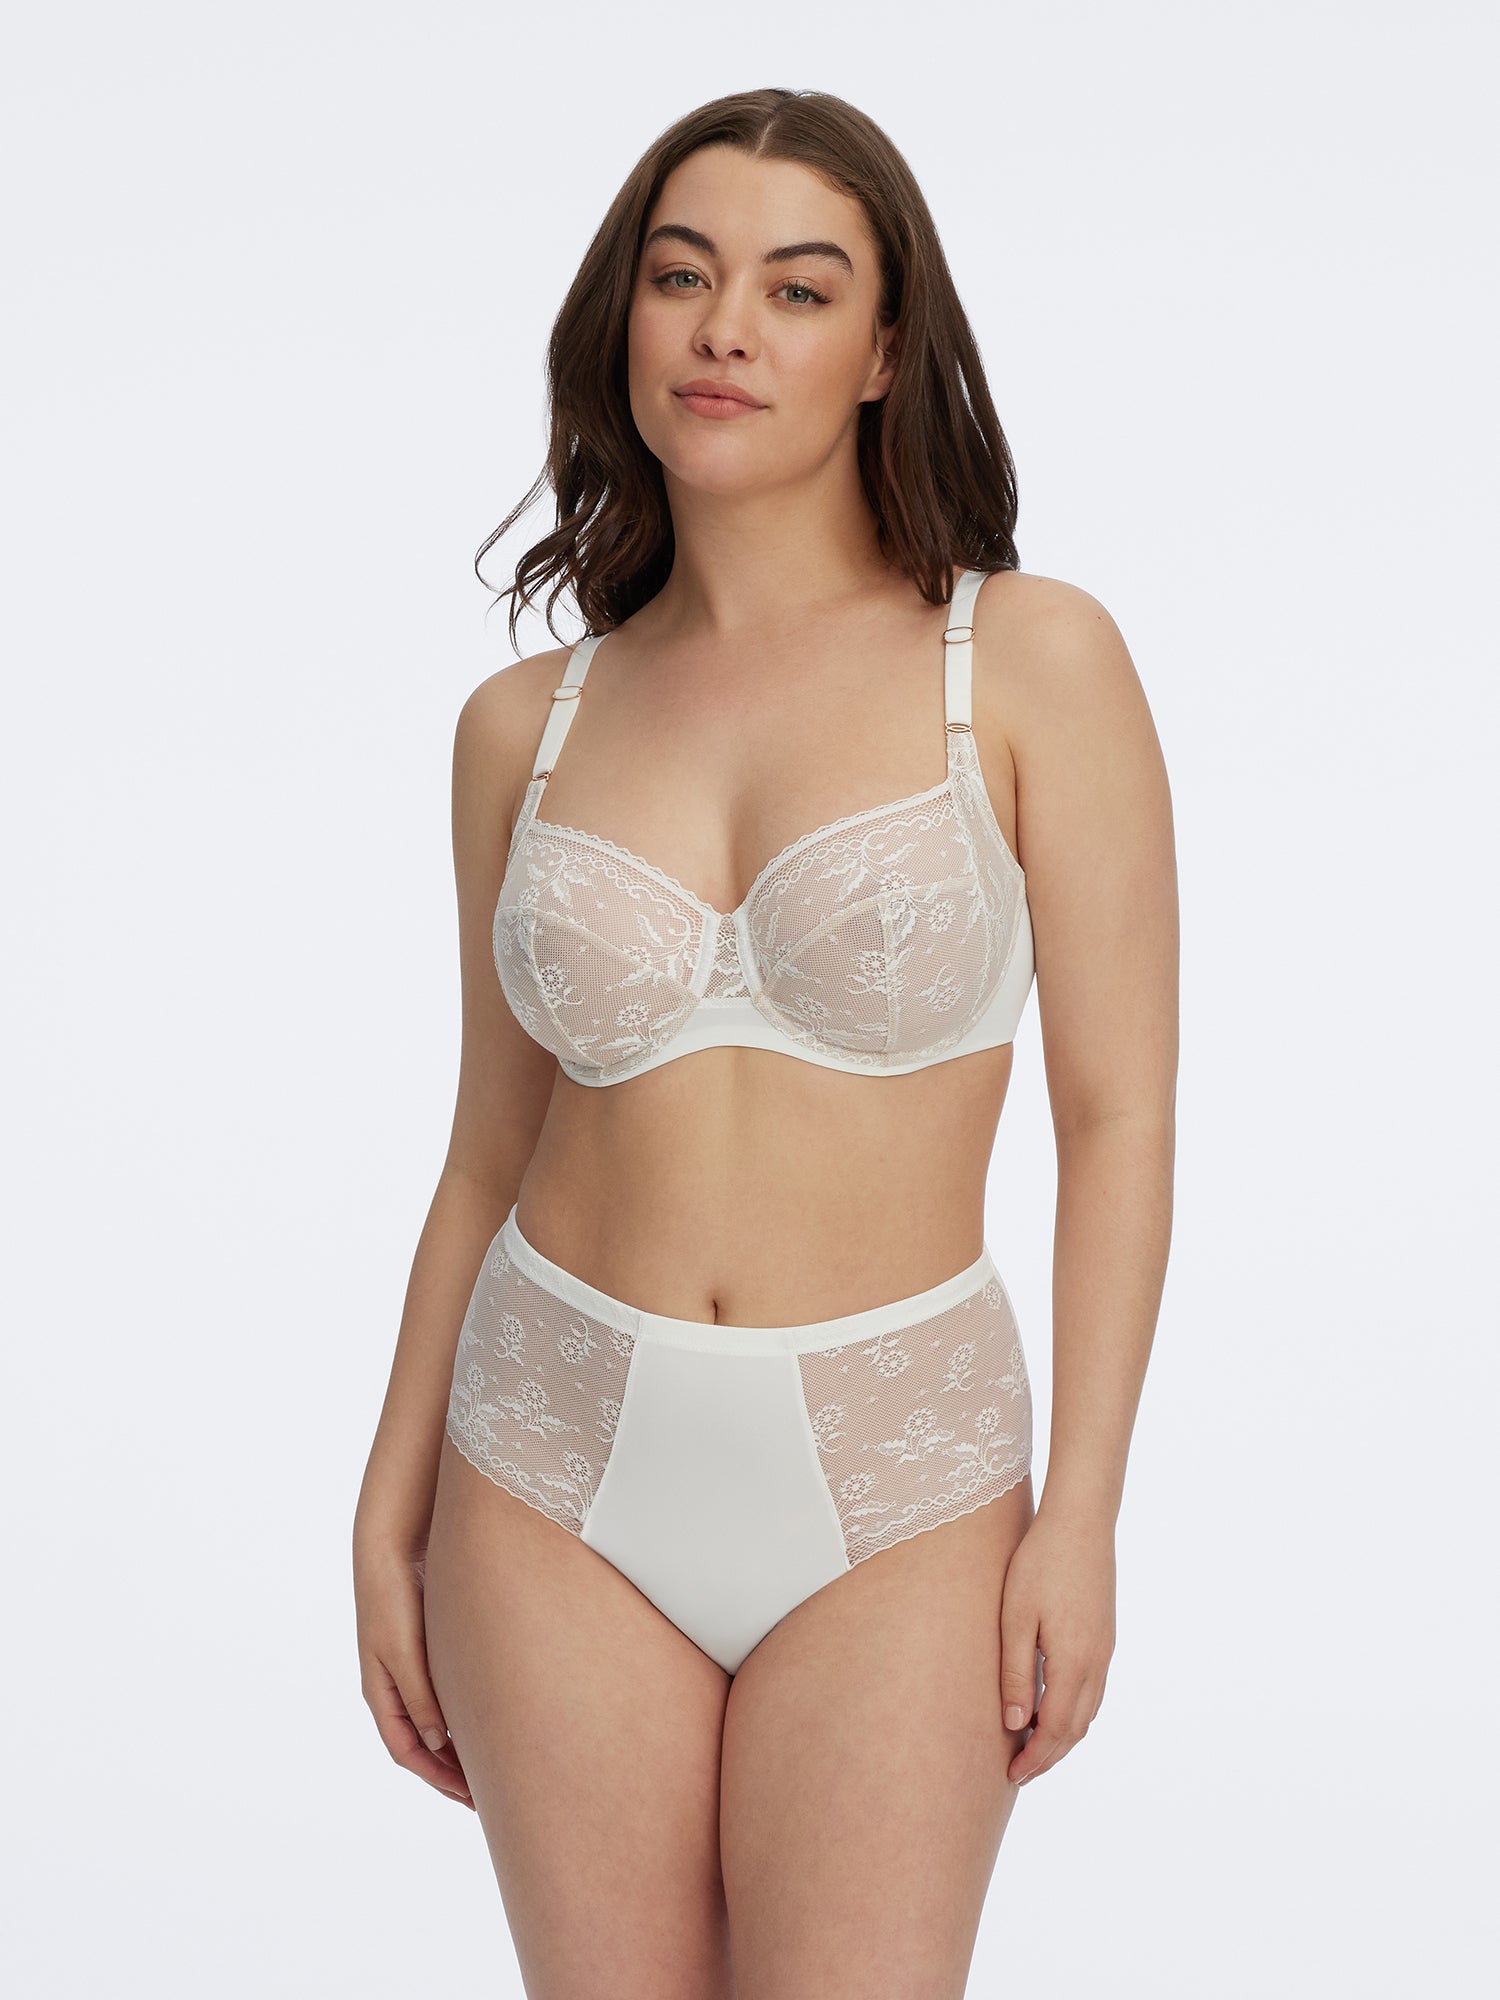 Buy Bralux Full Coverage Cherry Bra With Detachable Strap With Size B Cup,  Fabric Lace Color White Online